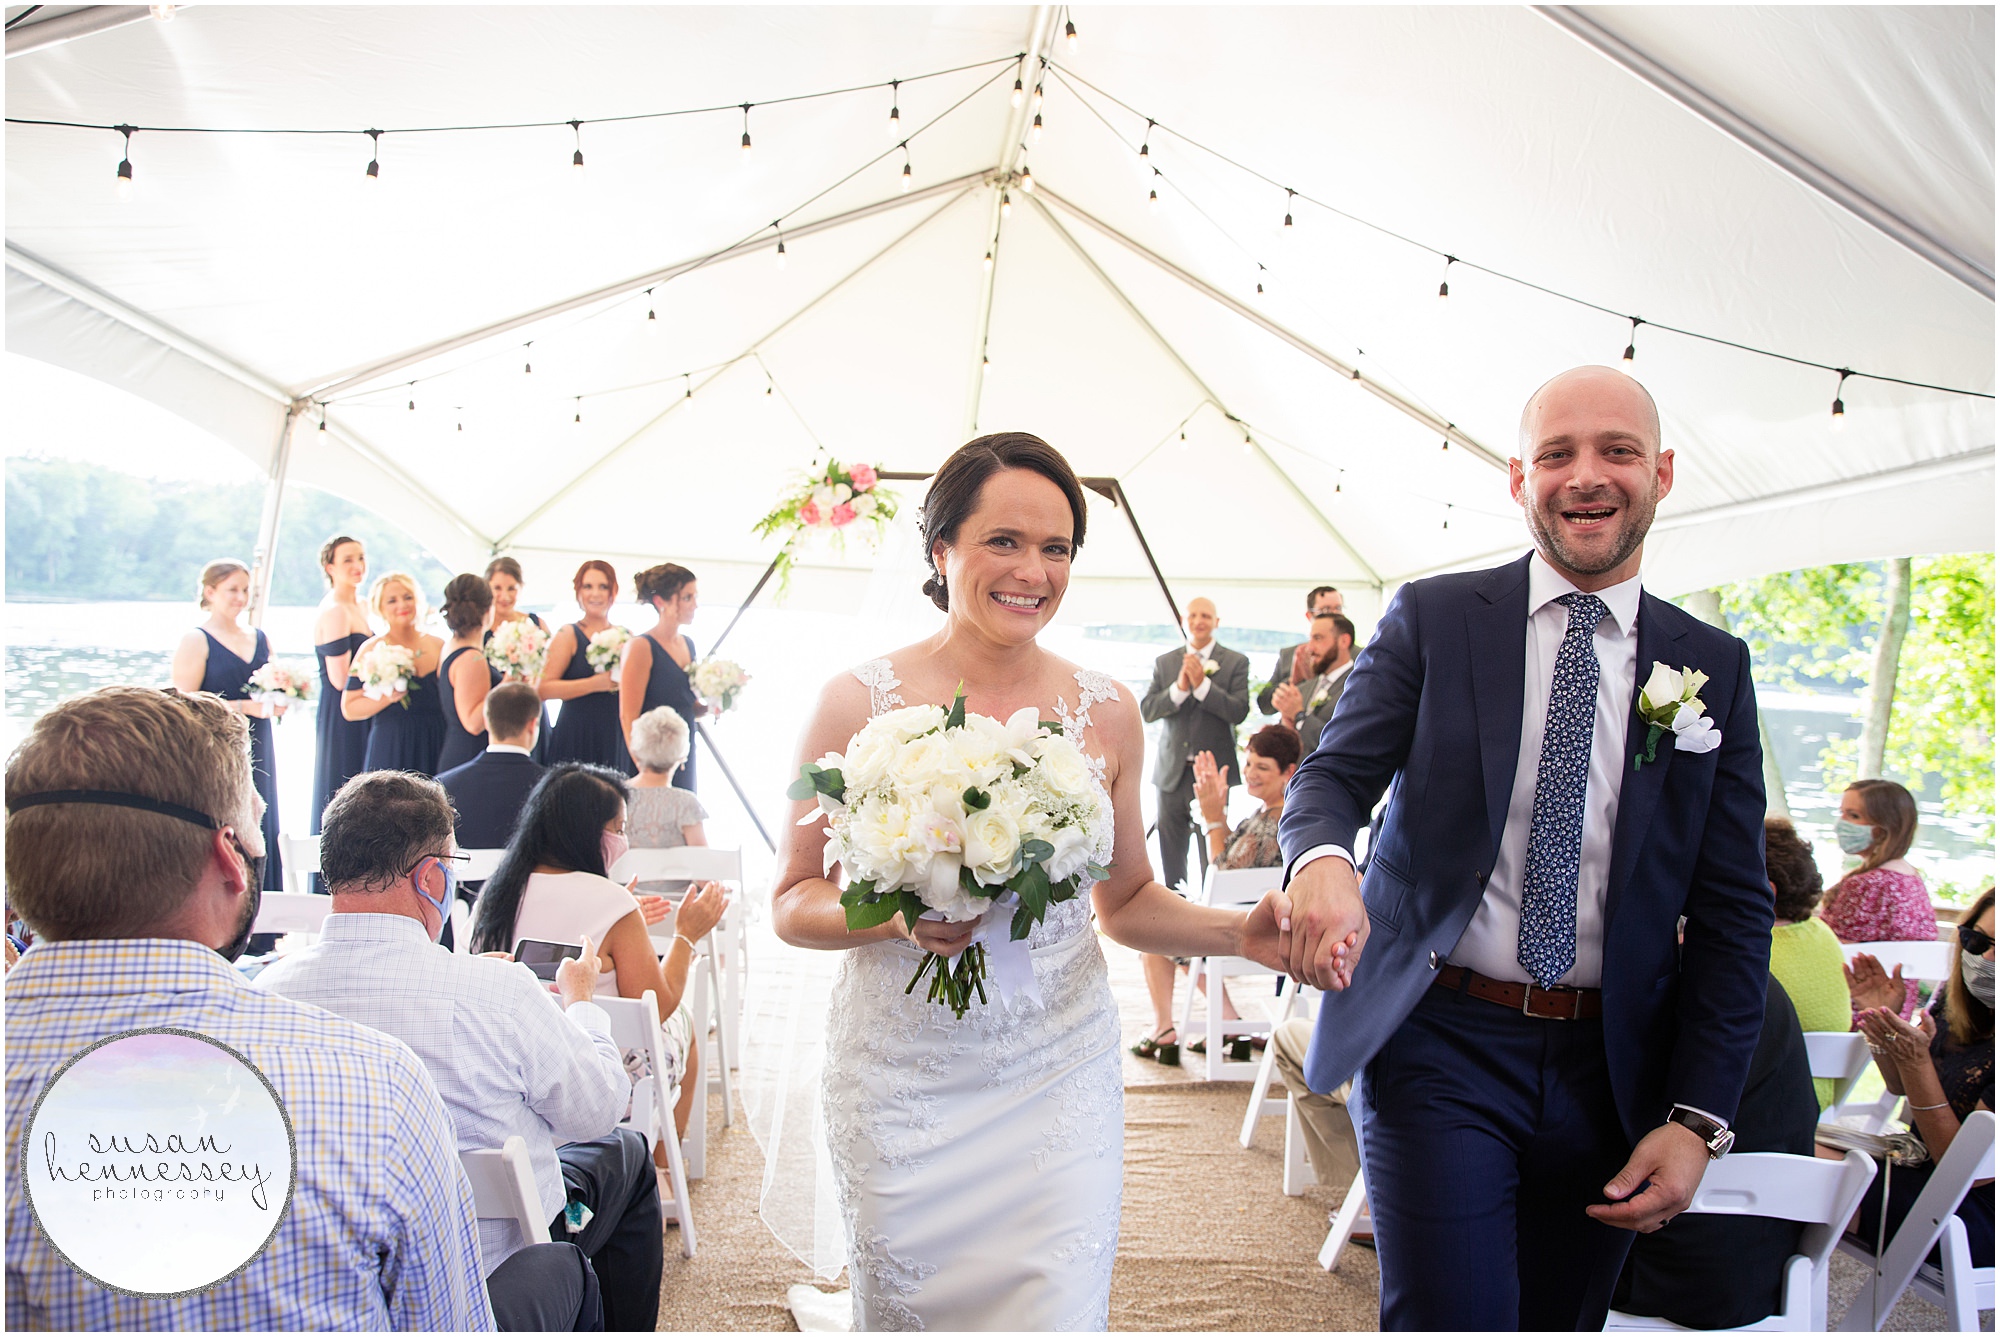 Susan Hennessey Photography Best of 2020 Weddings - South Jersey lake house wedding tented ceremony